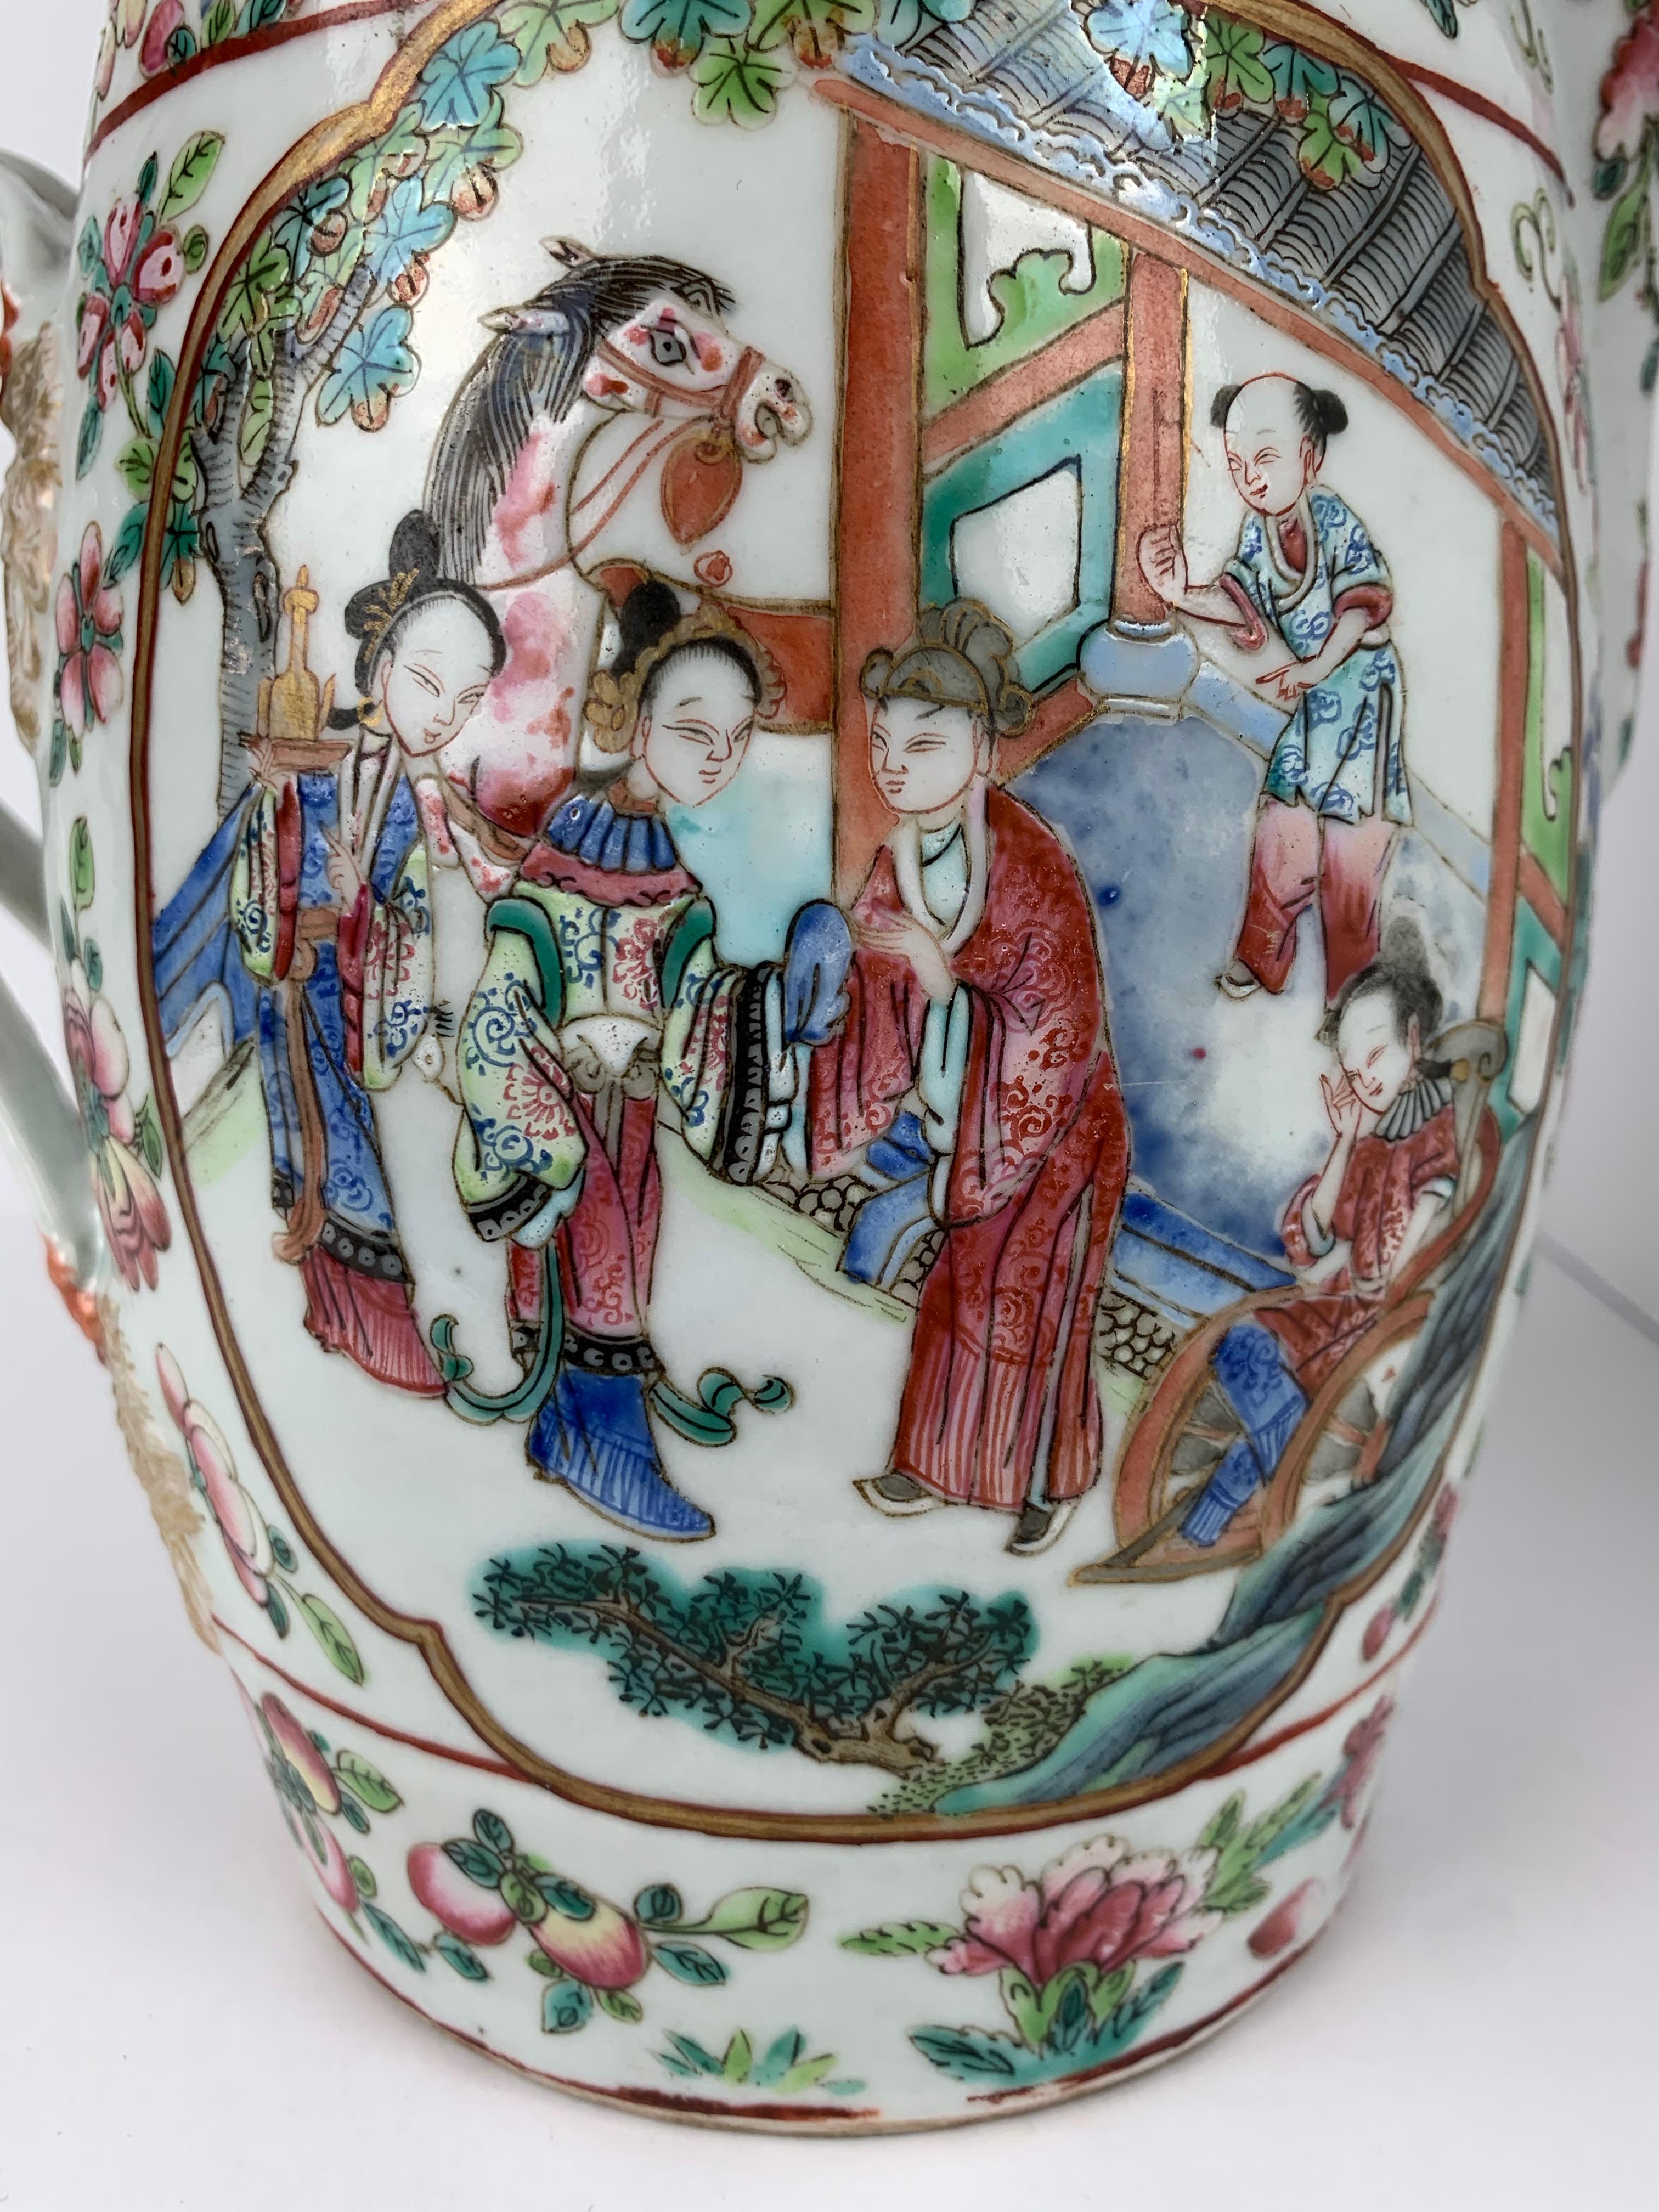 Enamel Chinese Export Rose Canton Mandarin Porcelain Cider Jug with Cover, 19th Century For Sale